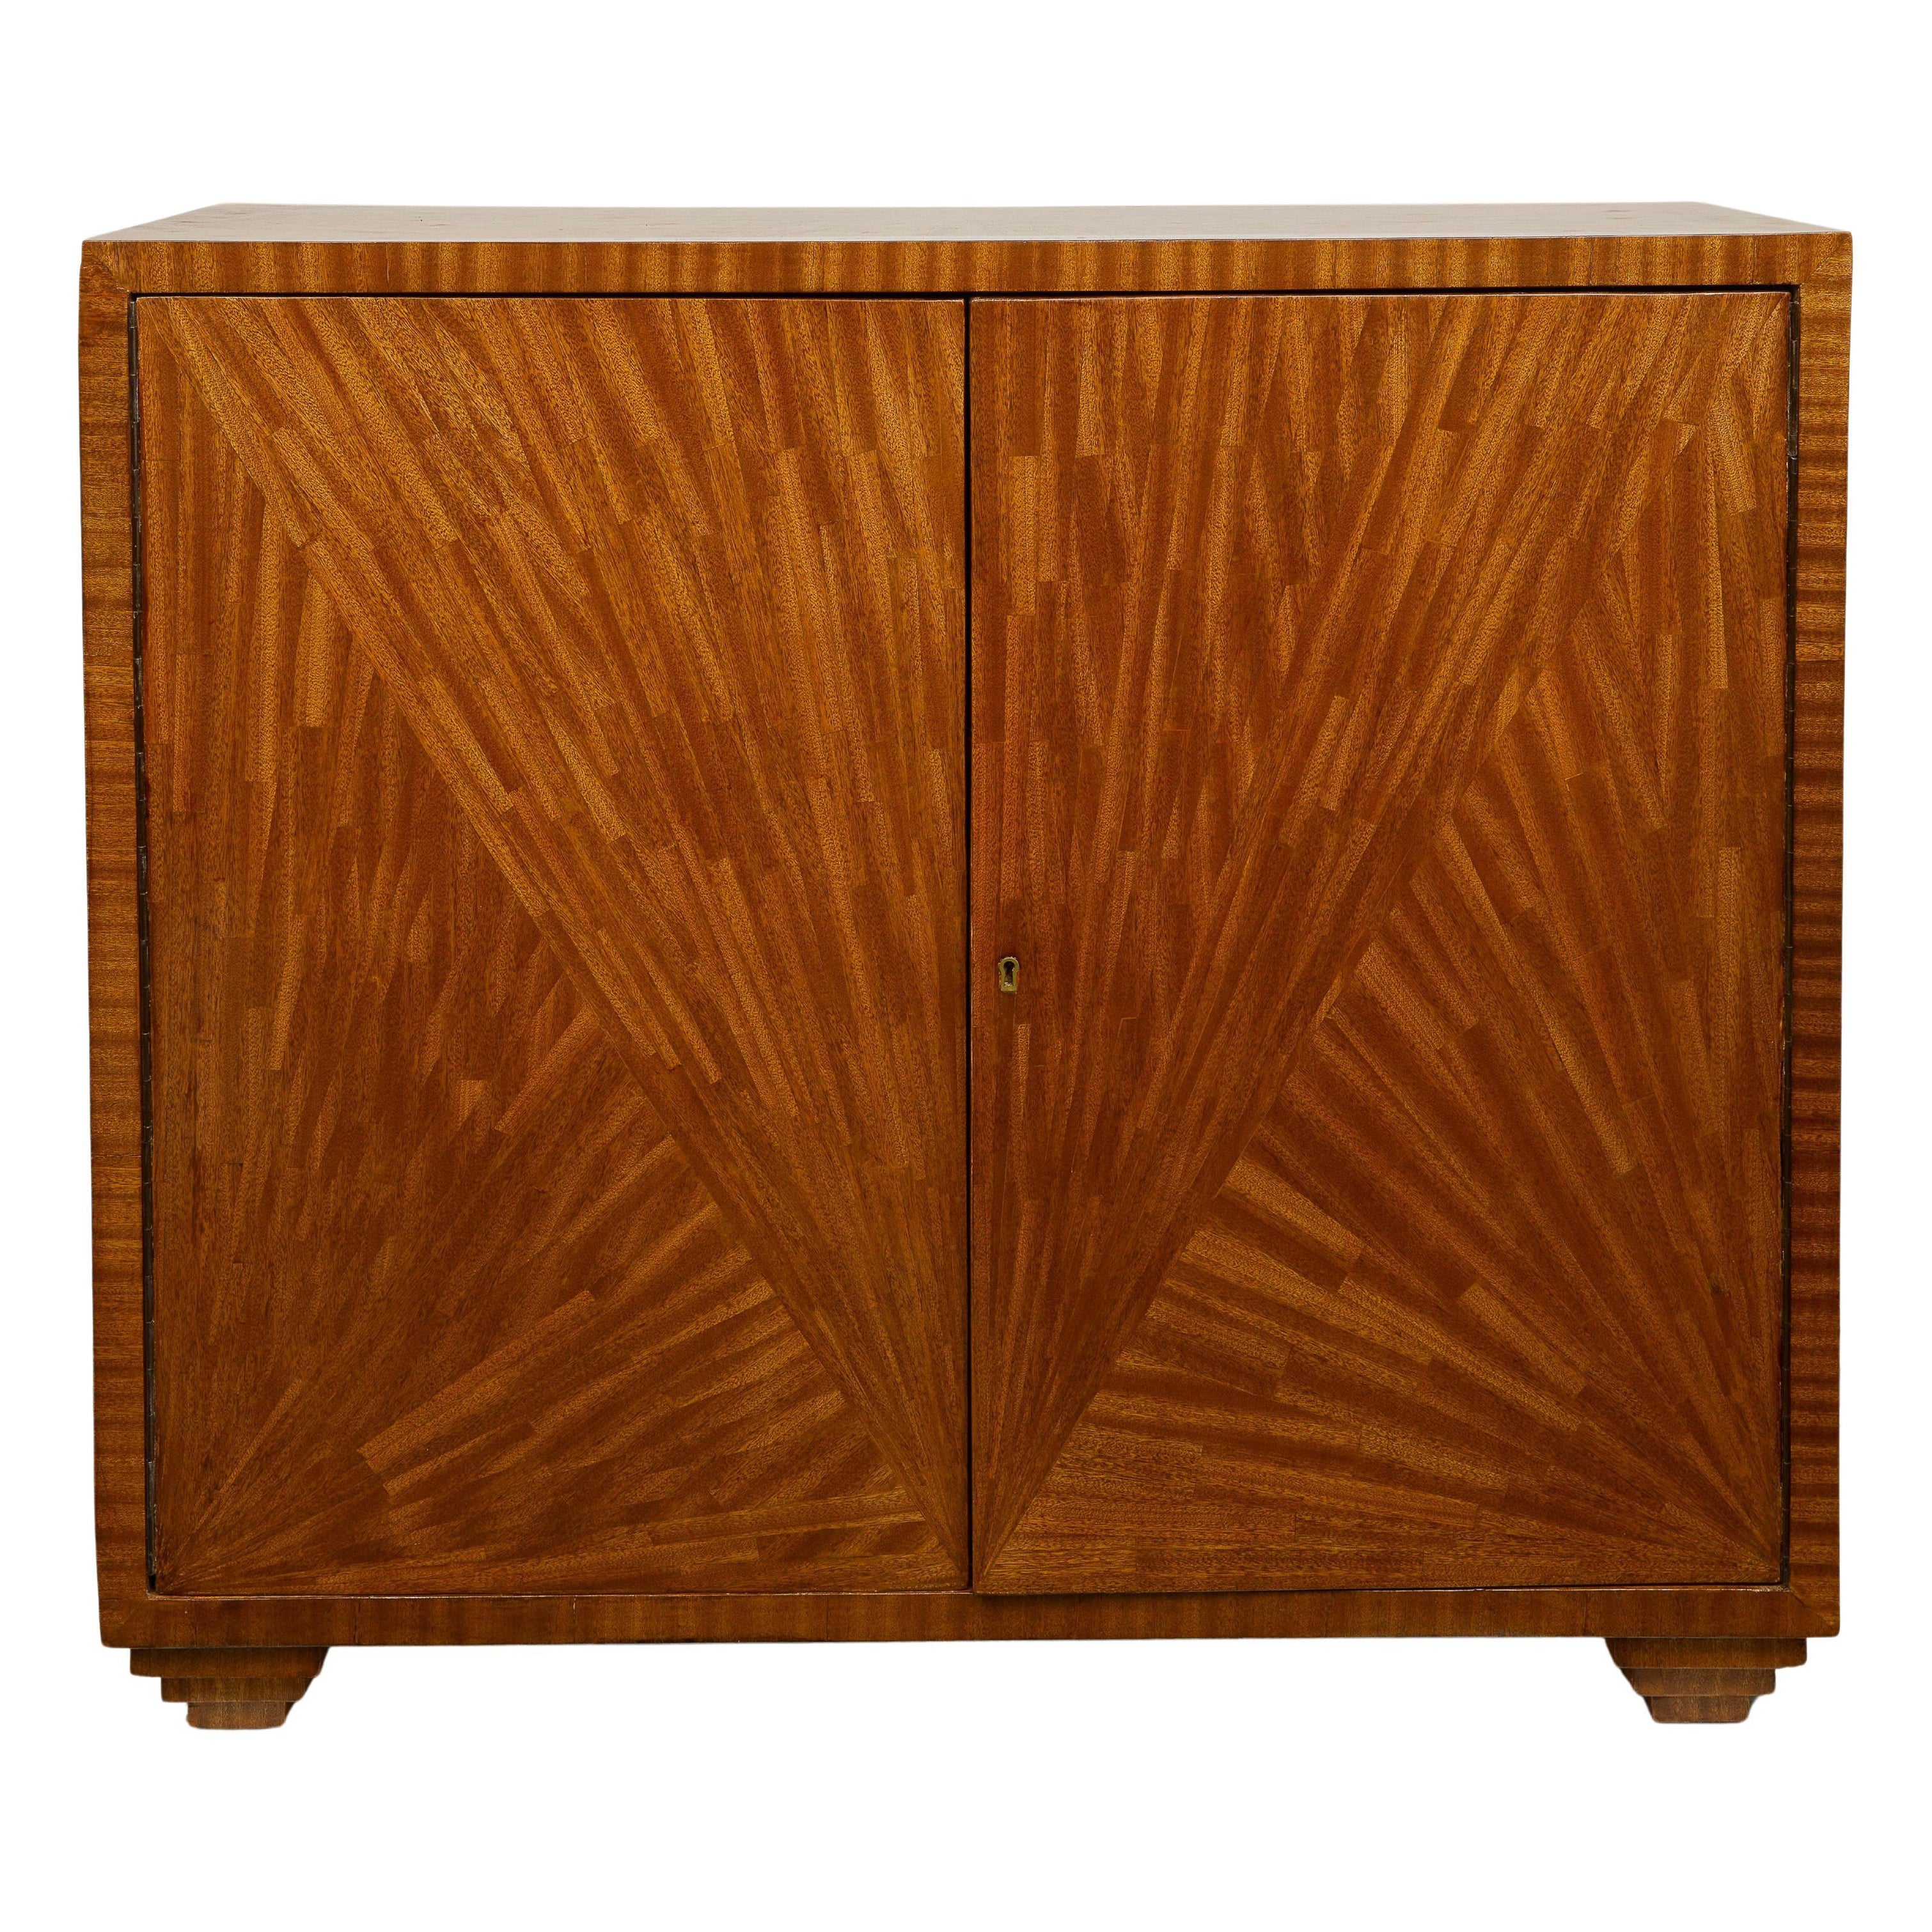 Jean-Michel Frank Inspired Exquisitely Crafted Parquetry Cabinet For Sale